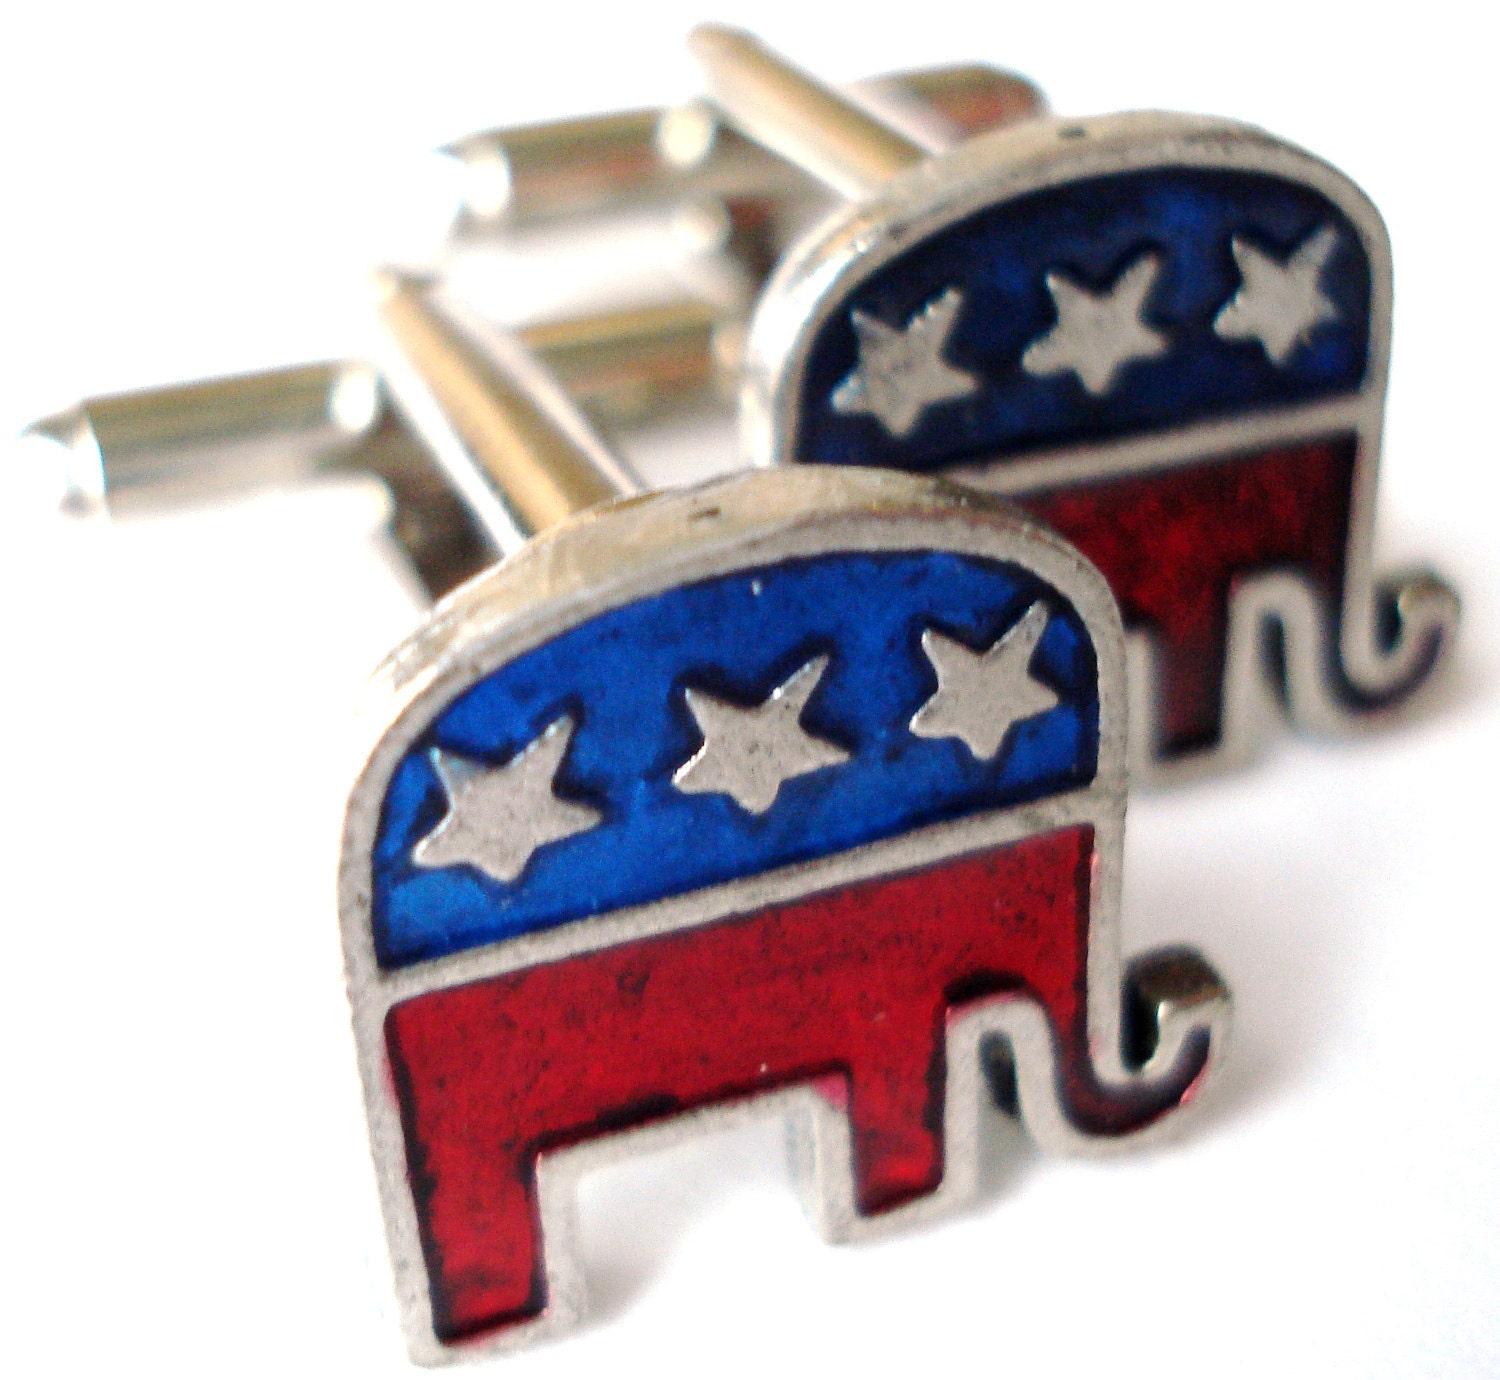 Republican Cufflinks Pair, On Sale Now, Gift Box Included, Unique Gift Idea, Silver Tone Setting, 100% Guaranteed